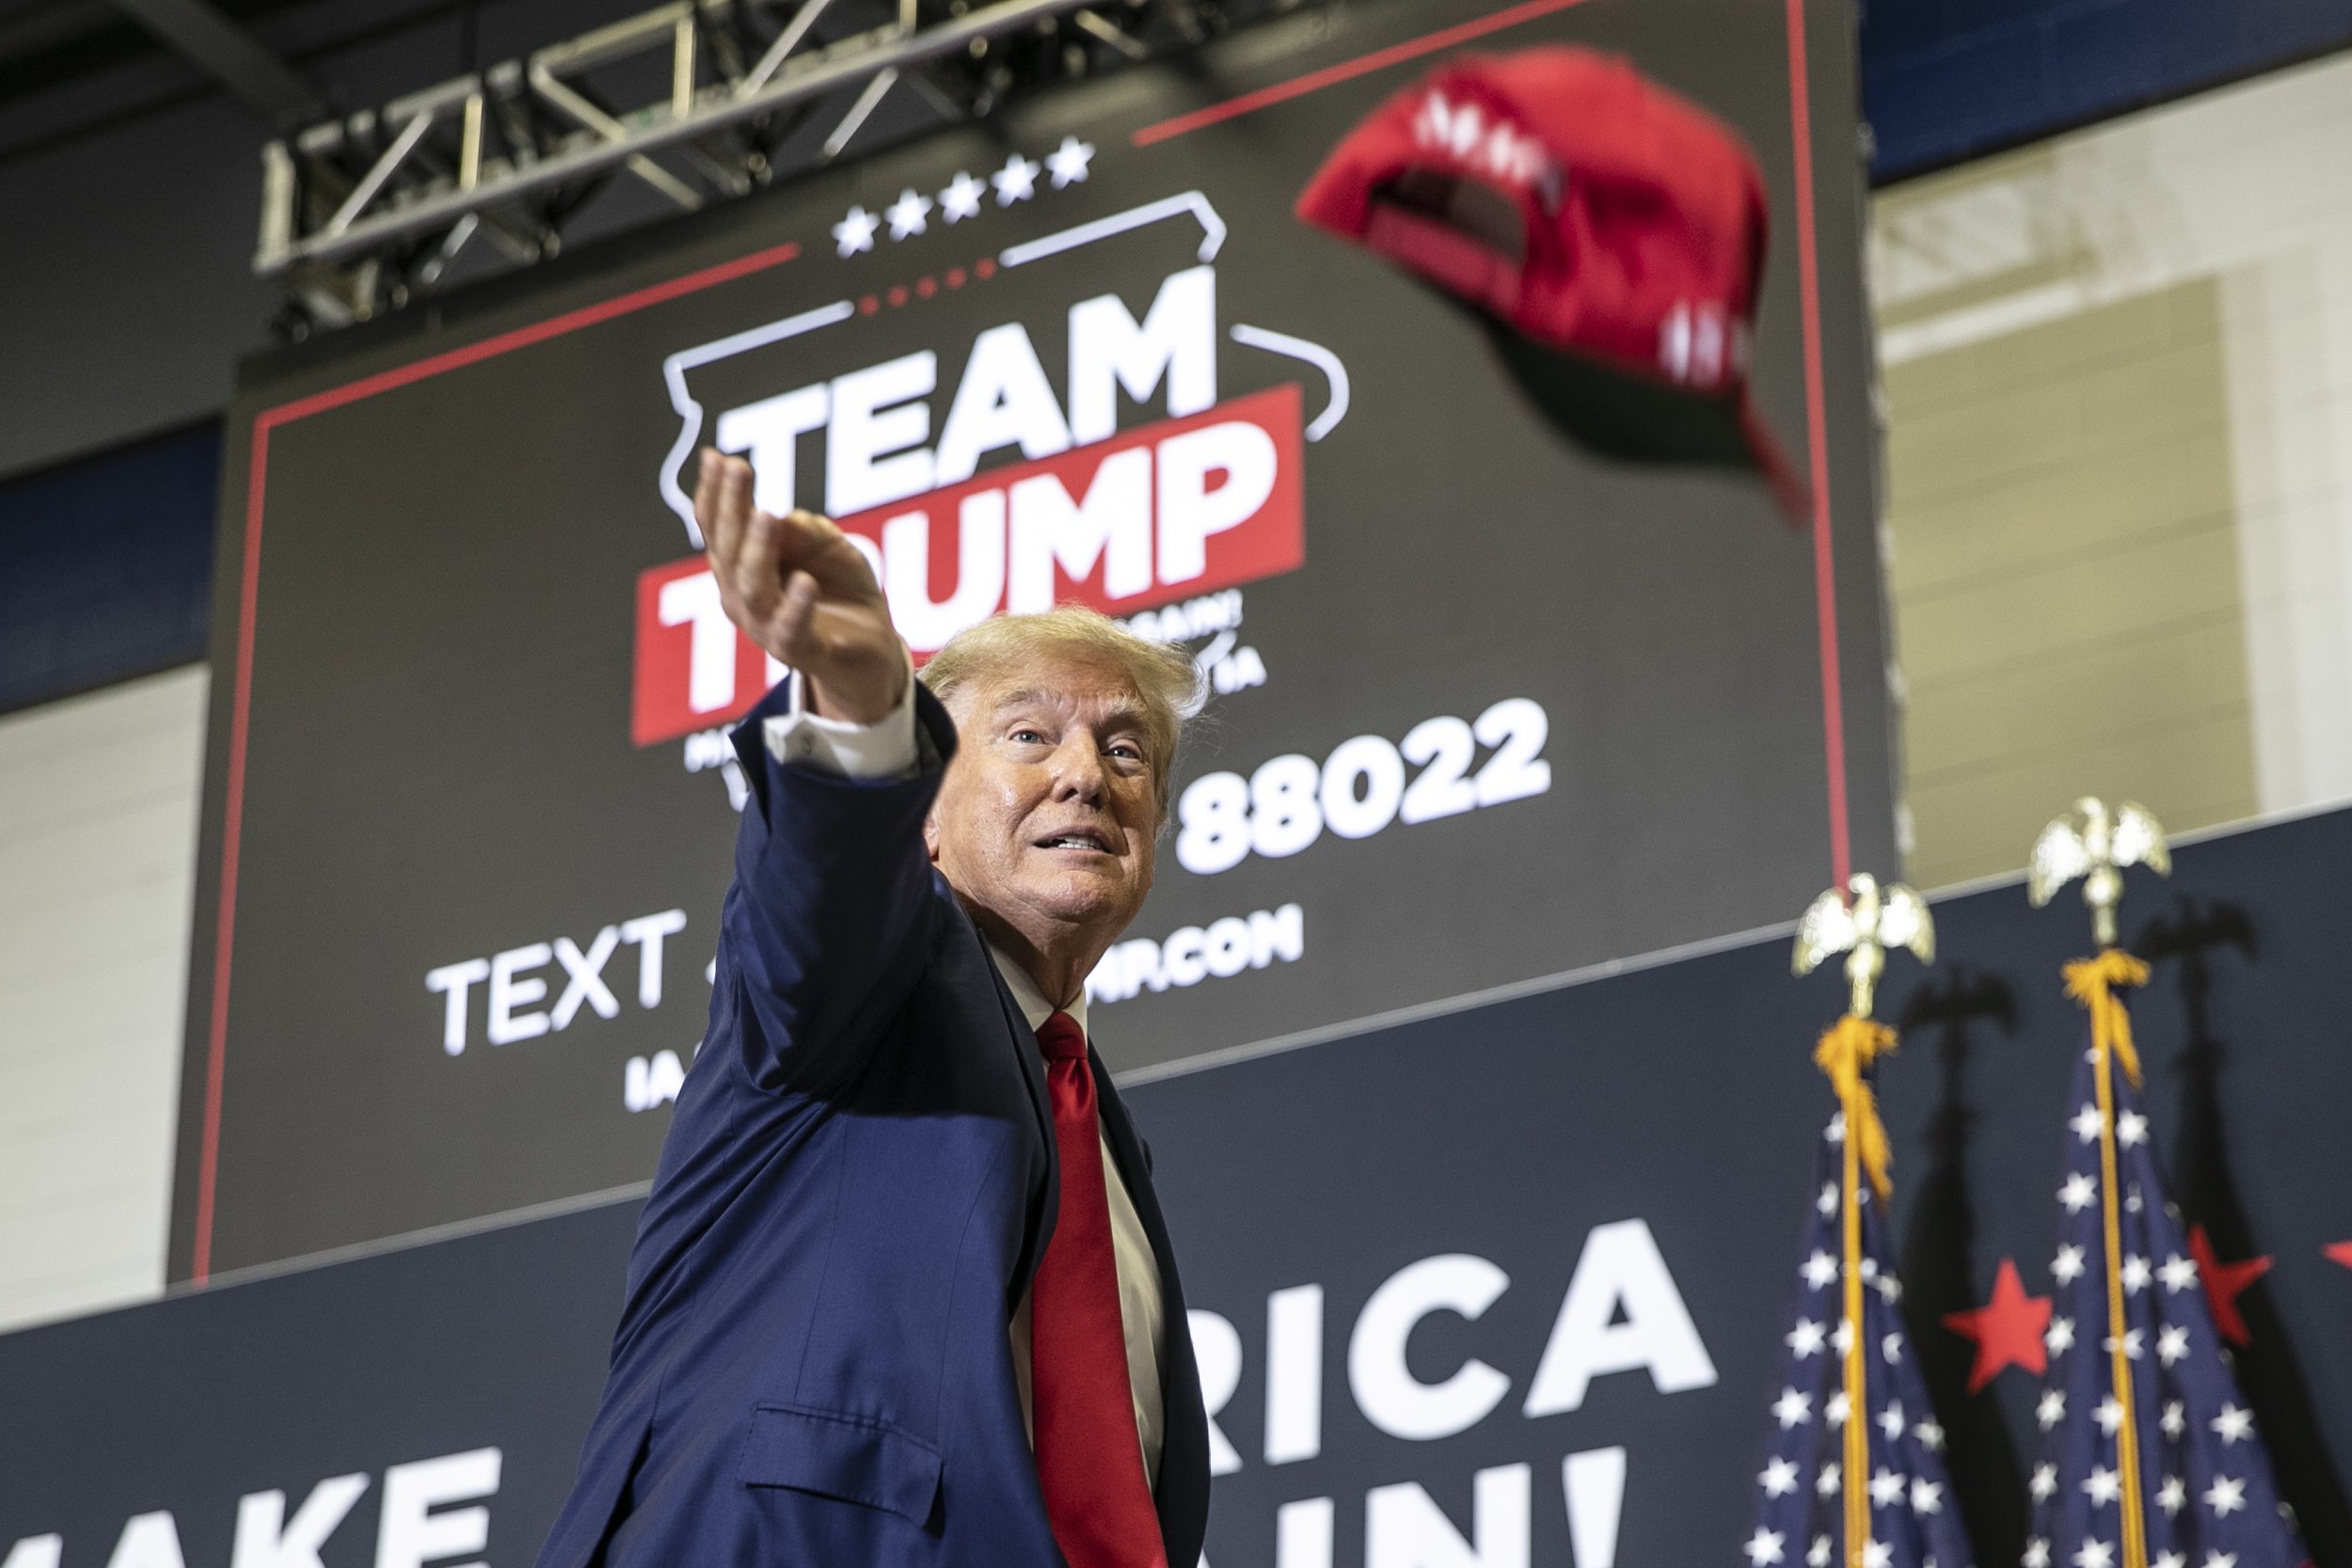  Republican presidential candidate and former President Donald Trump tosses out hats to the crowd during a caucus event on Saturday, Dec. 2, 2023, at Kirkwood Community College in Cedar Rapids, Iowa. The event drew a crowd of several hundred attendee